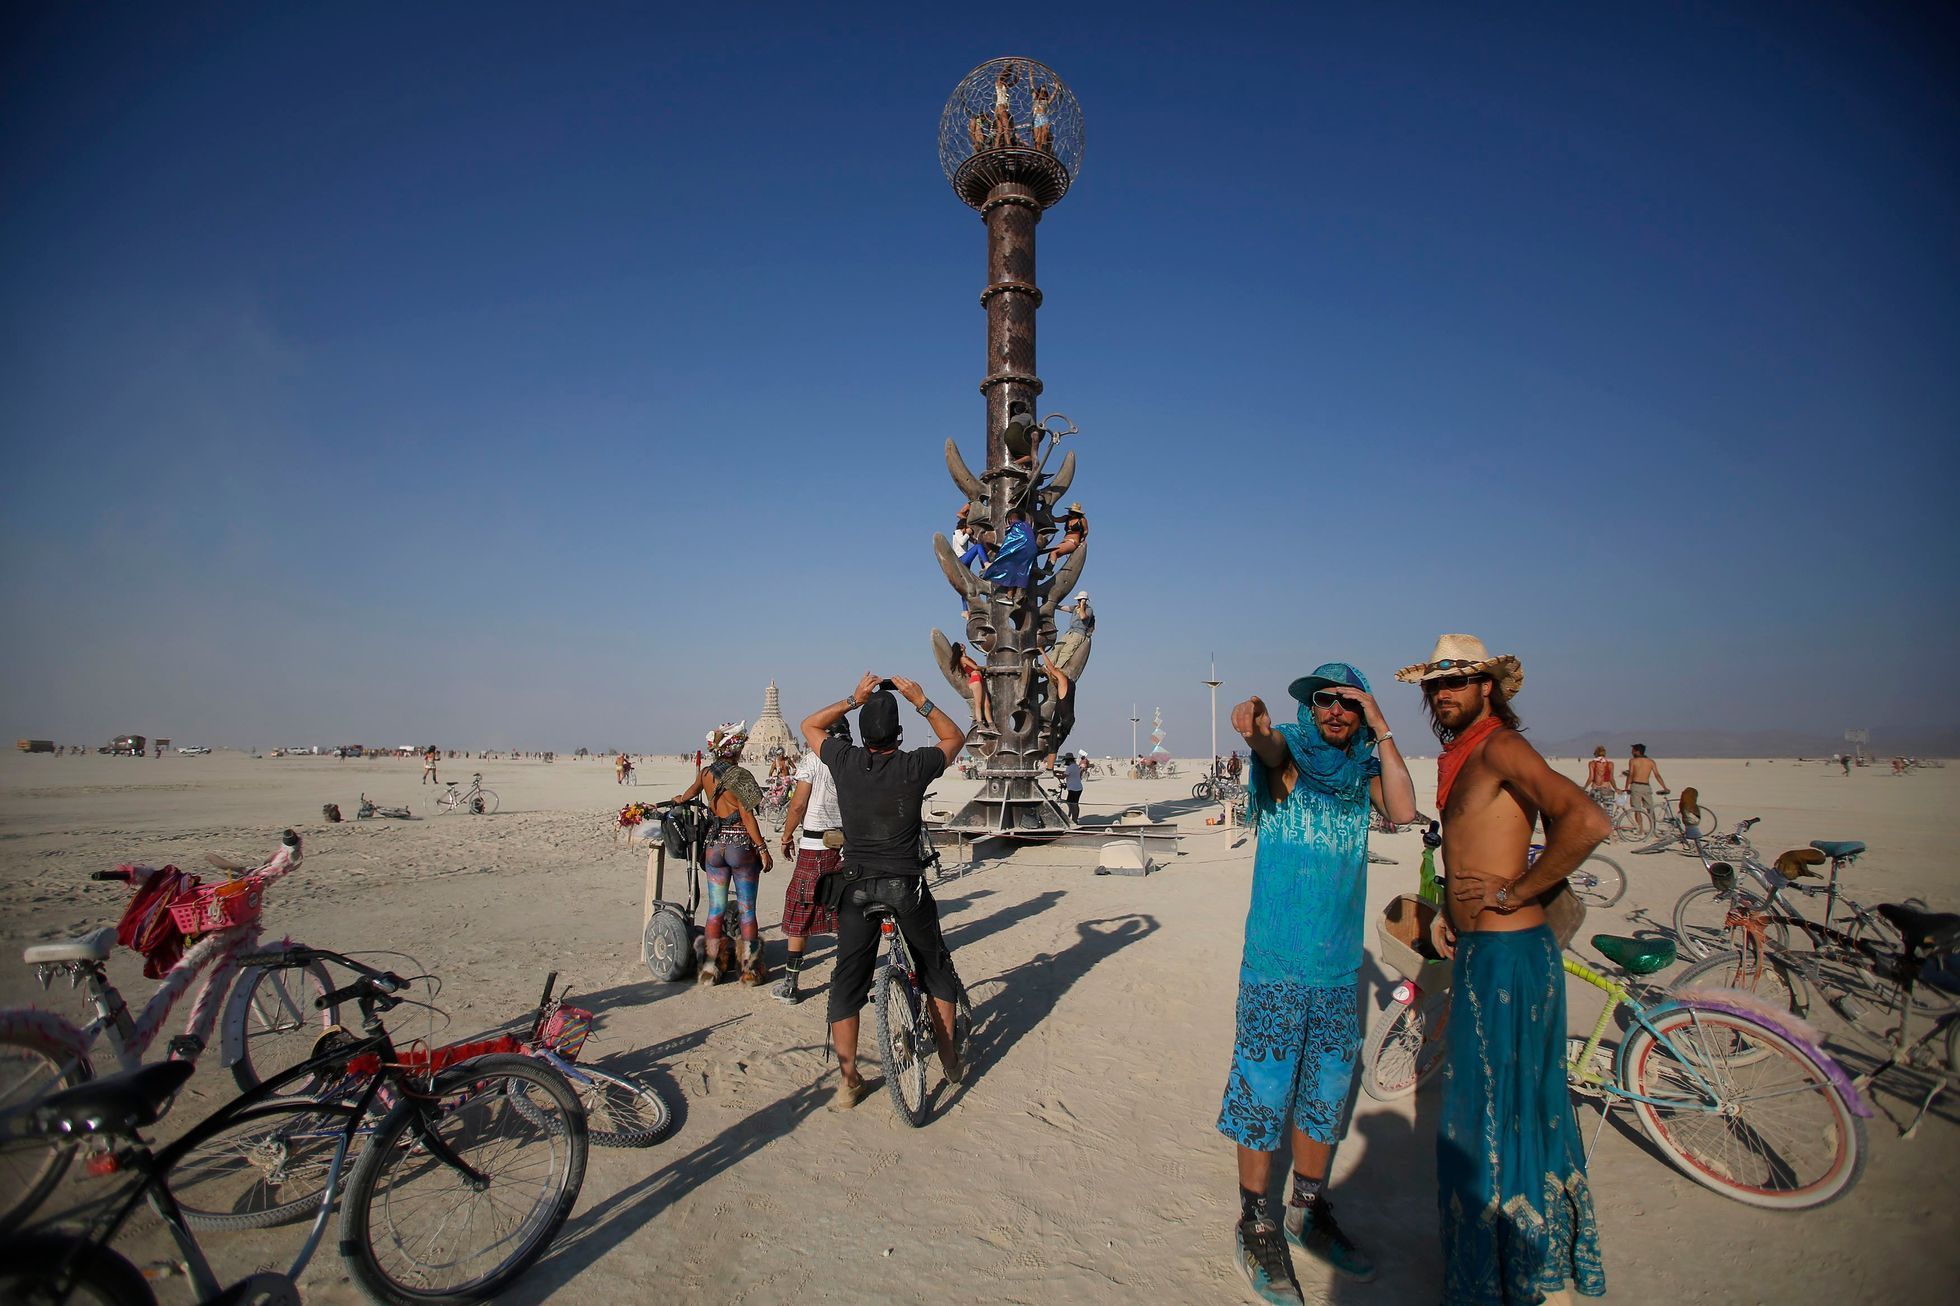 Participants climb the Minaret art installation on the last day of the Burning Man 2014 &quot;Caravansary&quot; arts and music festival in the Black Rock Desert of Nevada